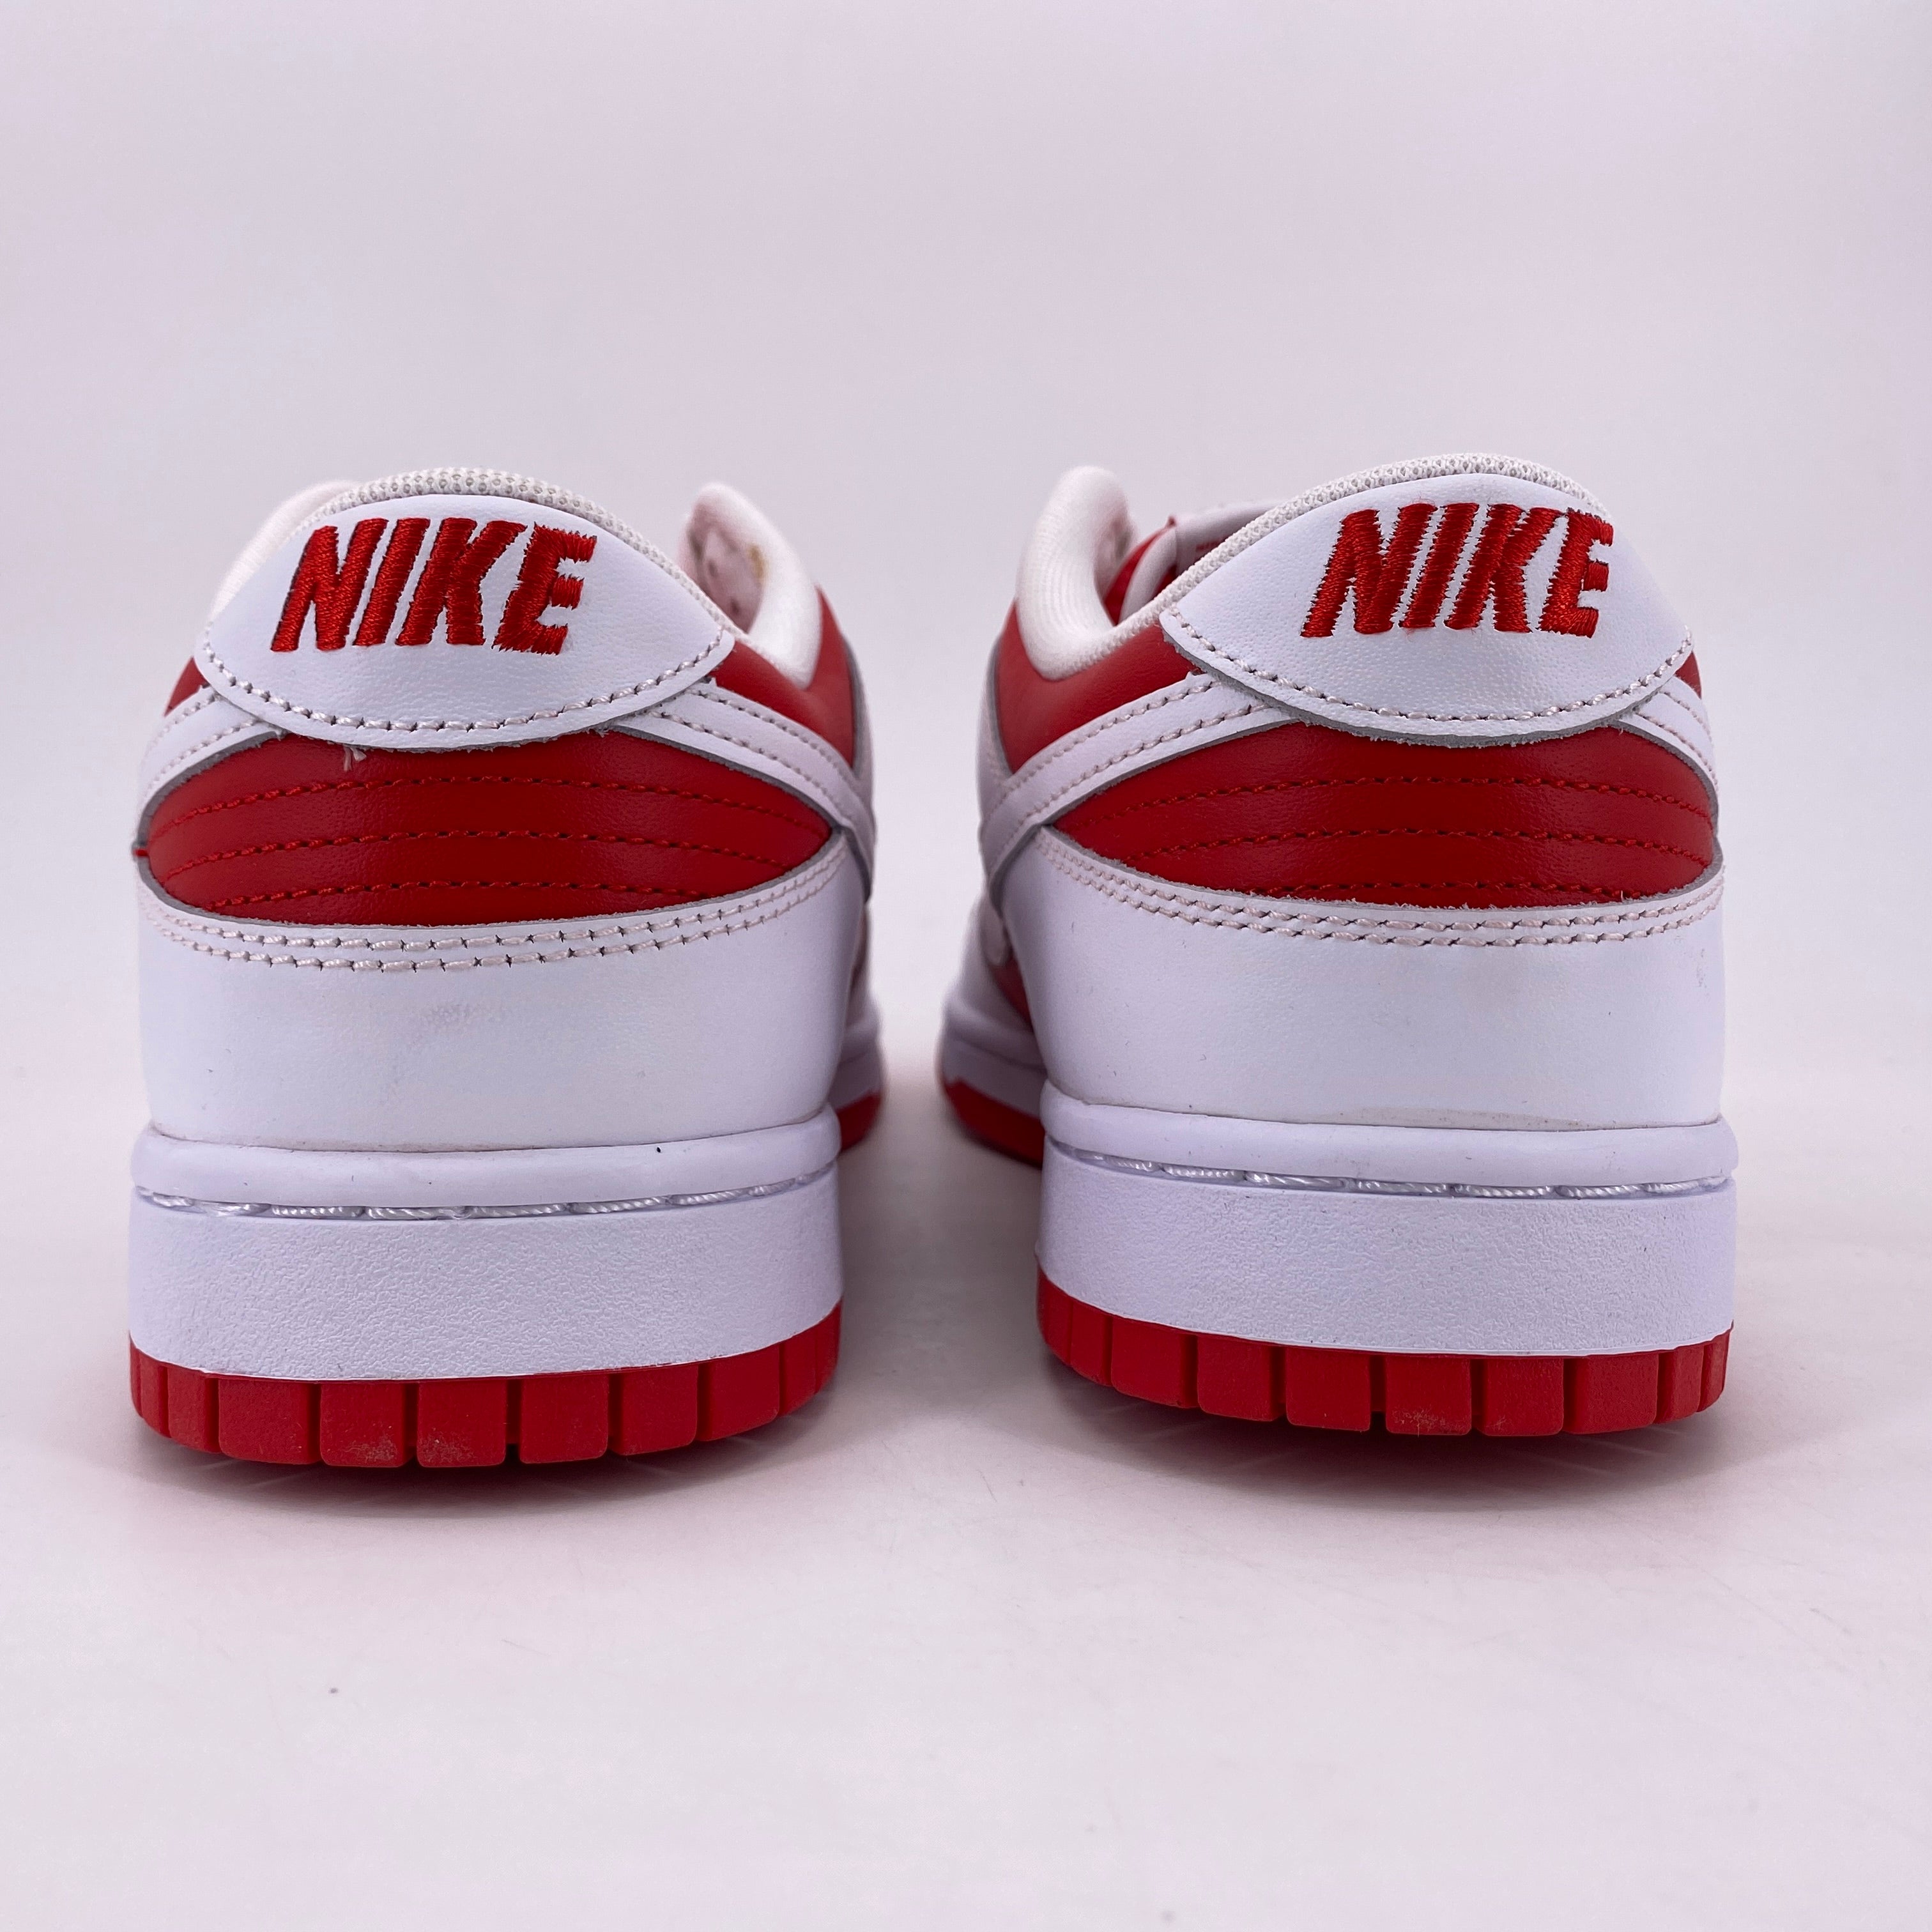 Nike Dunk Low Retro "Championship Red" 2021 New (Cond) Size 11